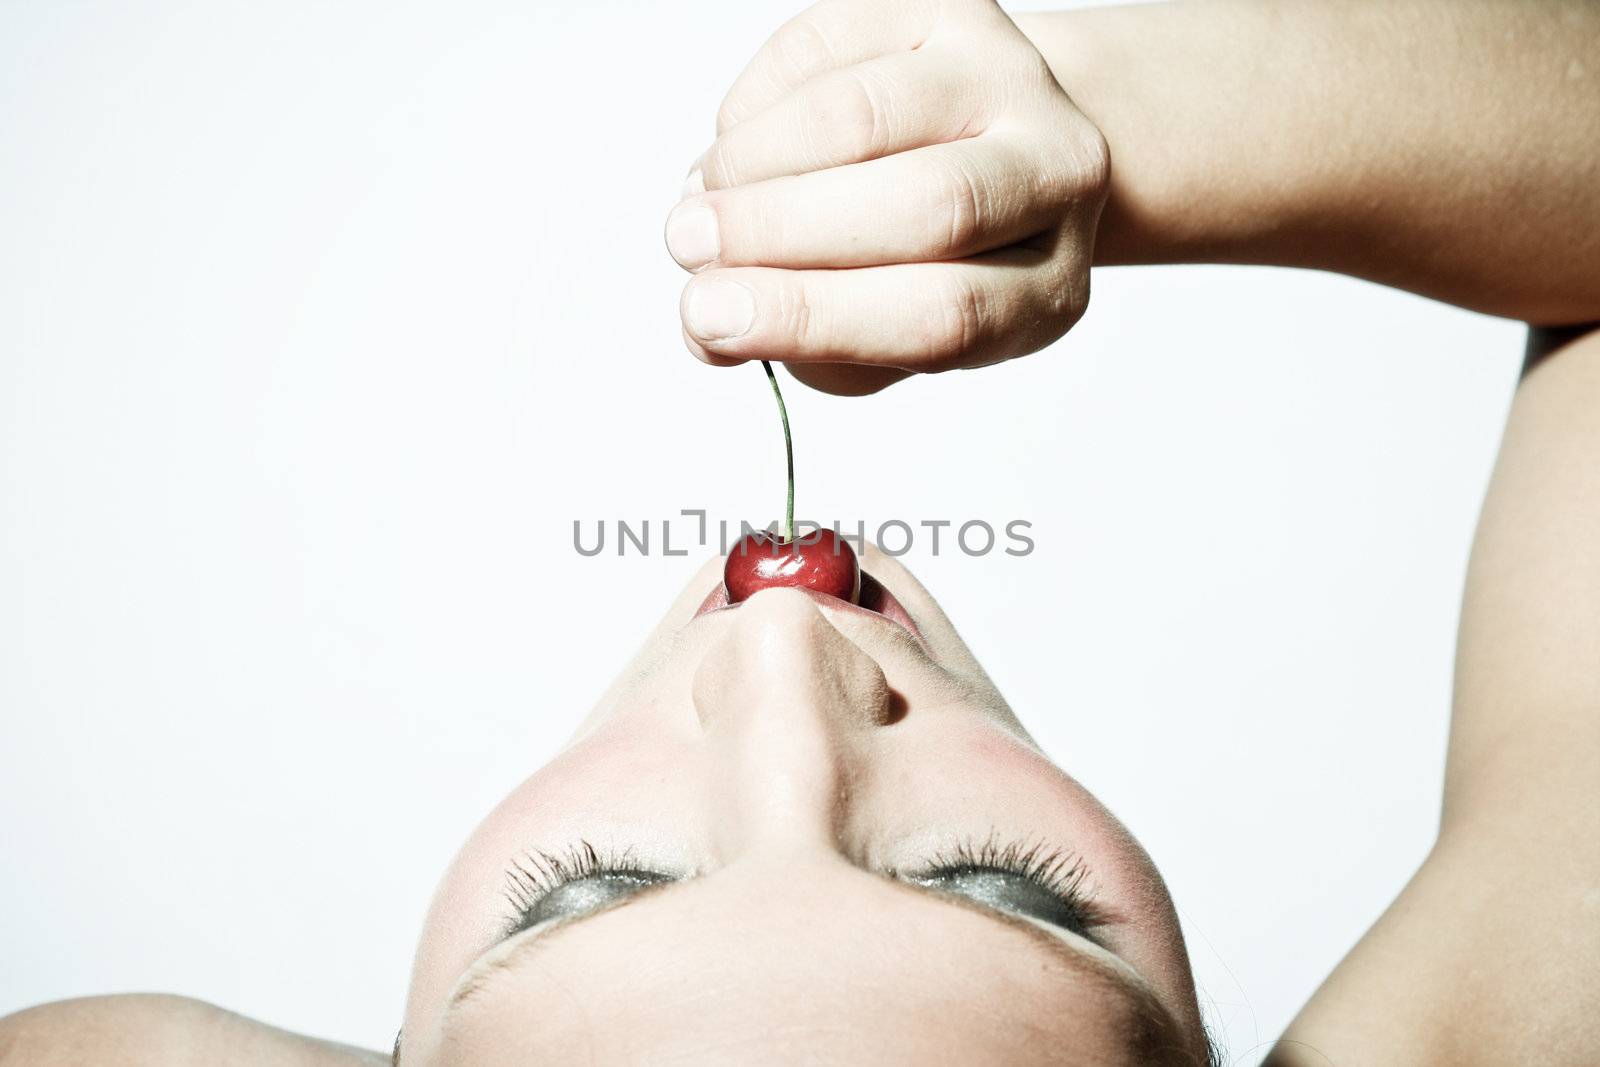 Upper View Of A Sensual Woman Tasting A Cherry